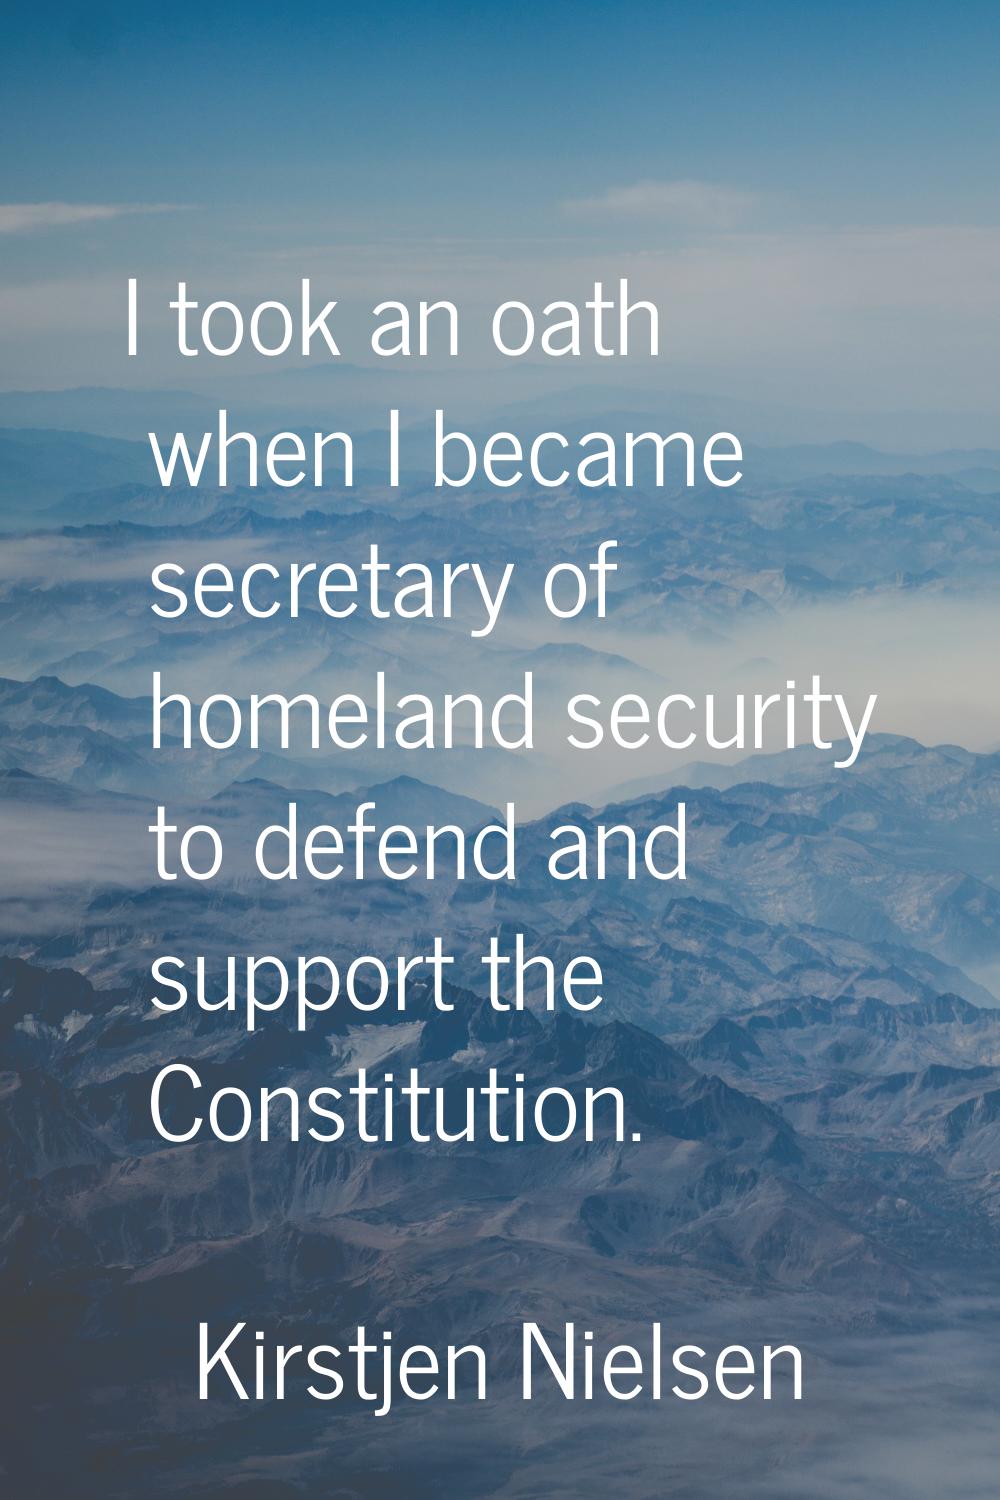 I took an oath when I became secretary of homeland security to defend and support the Constitution.